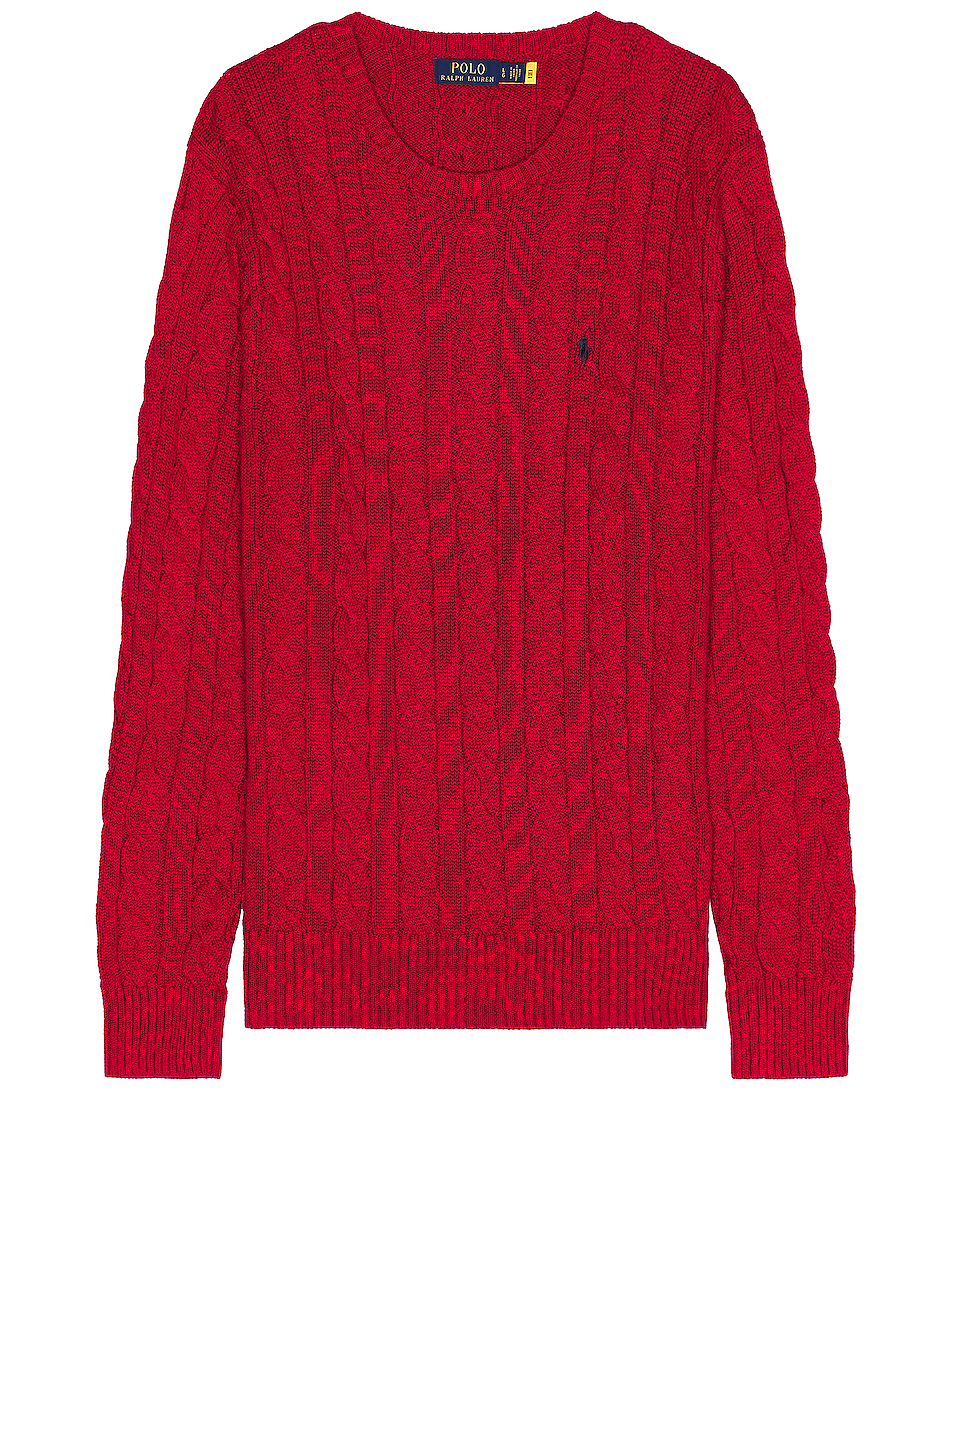 Polo Ralph Lauren Long Sleeve Sweater in Park Avenue Red | FWRD